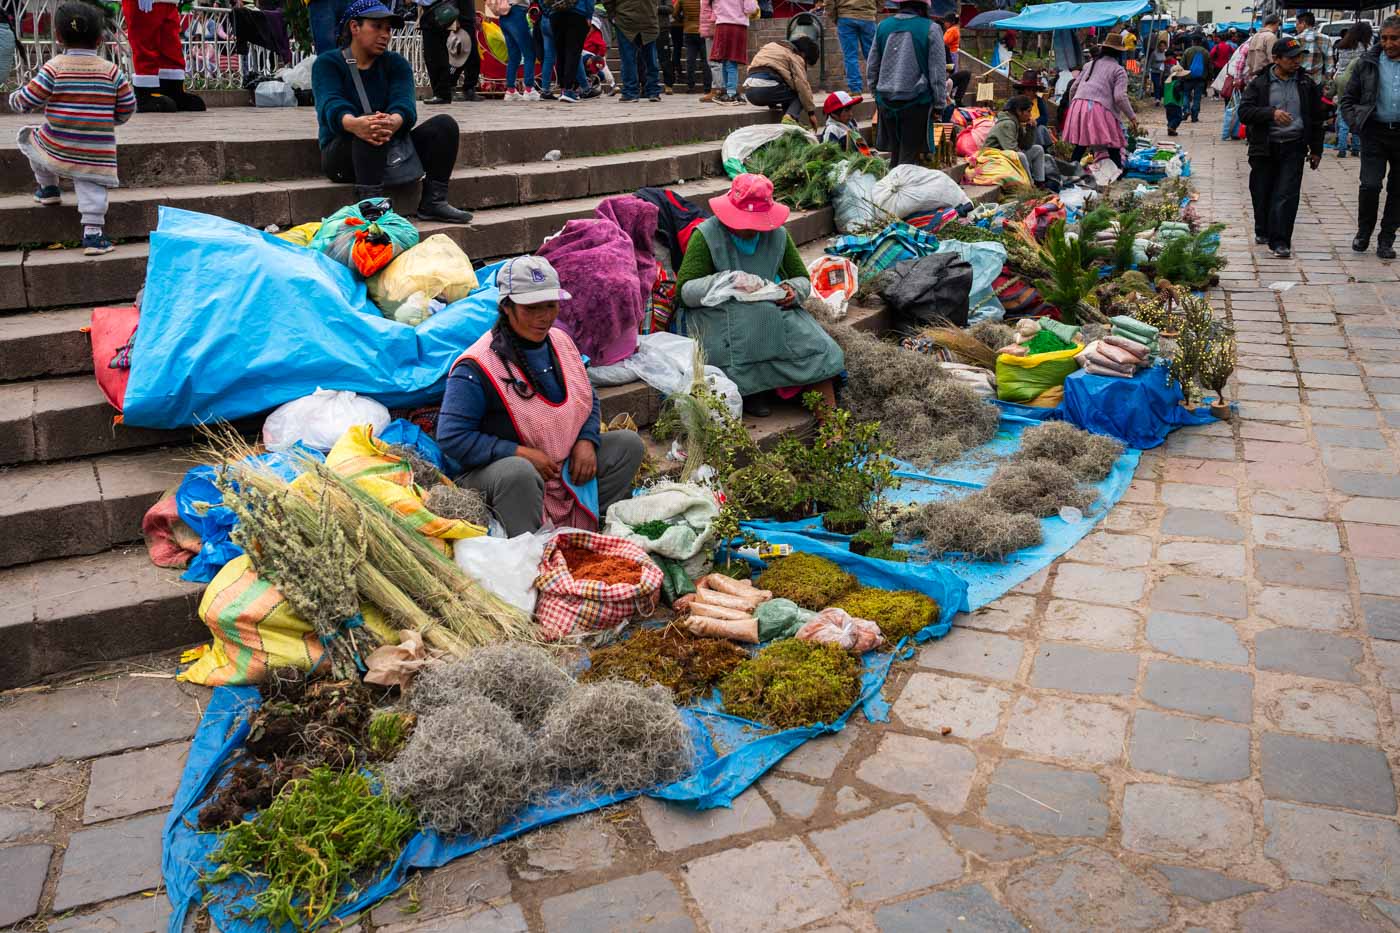 Local indigenous Peruvian women sat on the street selling a bunch of leaves, grass and moss .